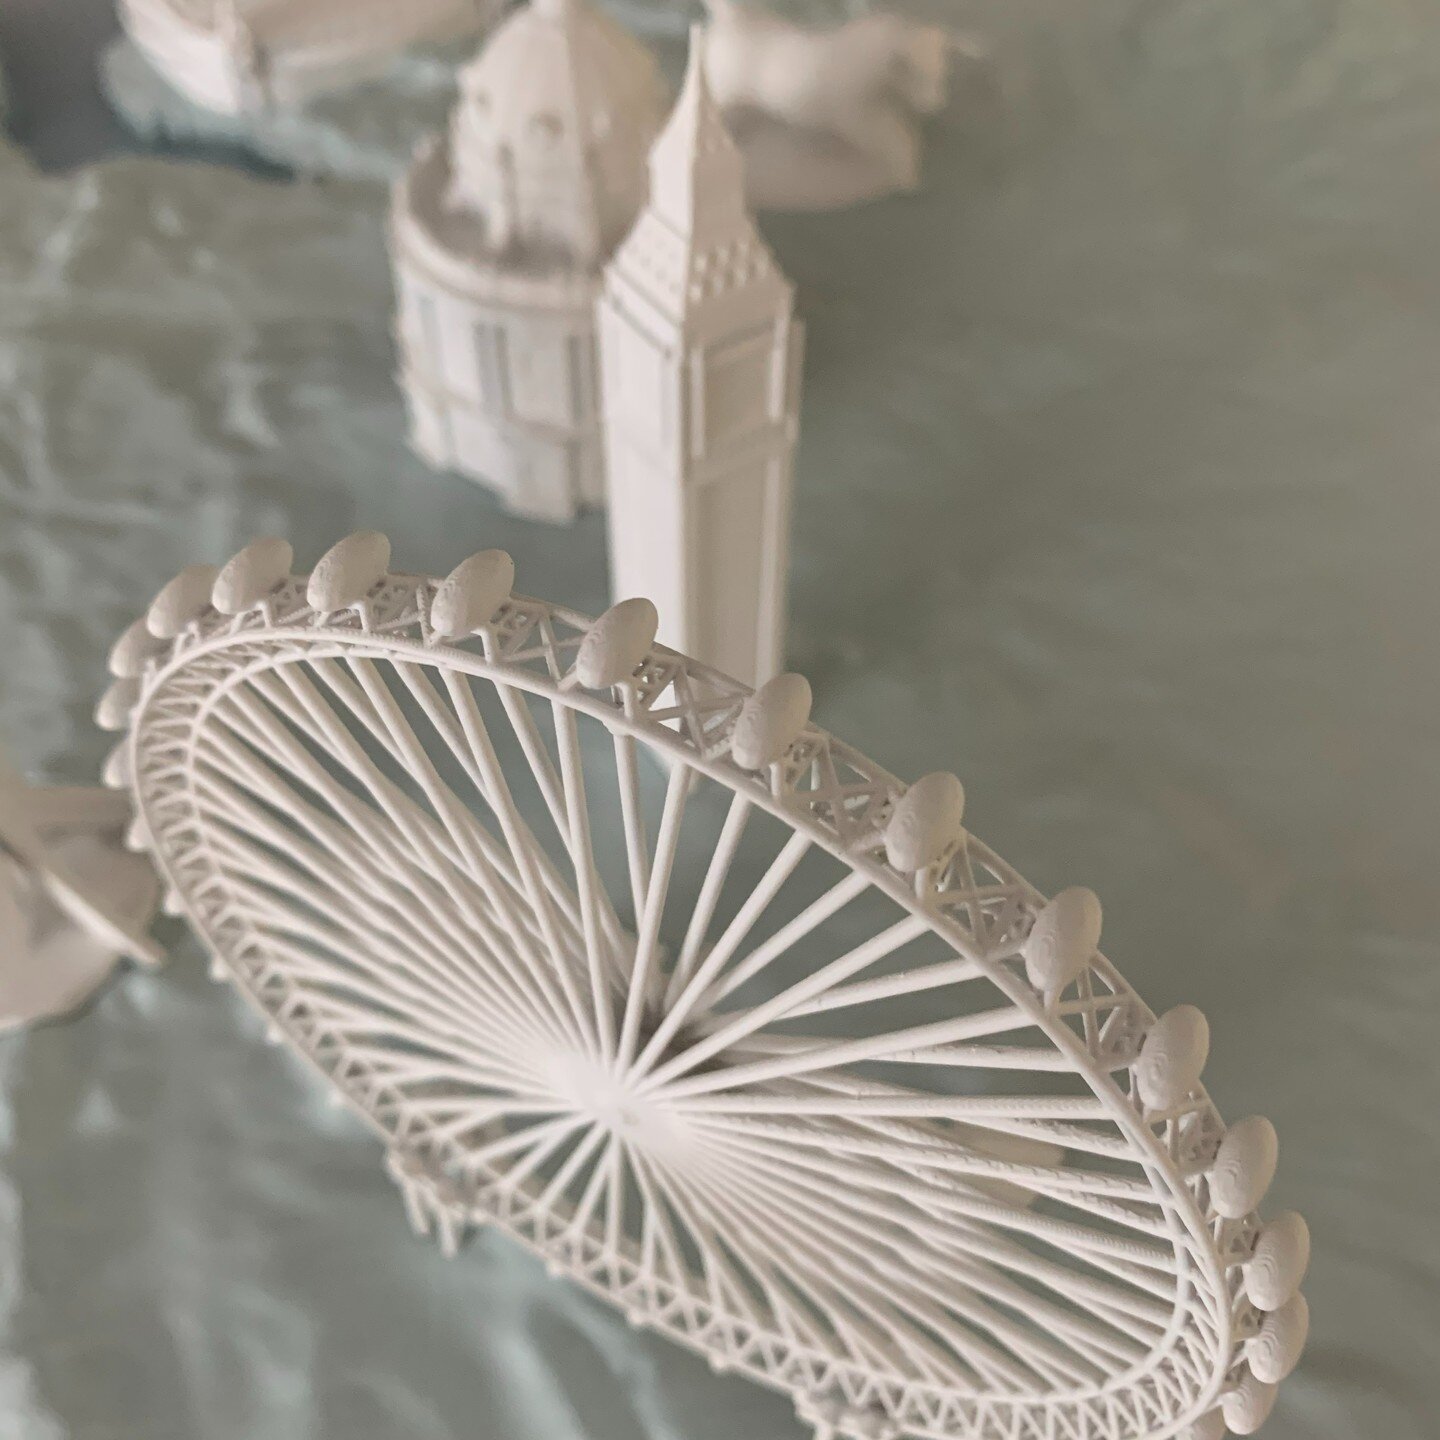 This image of a #3dprinted #londoneye shows the detail and intricacy that our #stereolithography #3dprinters can achieve. For context the London Eye and other London icons are hand size....#3dprinting #3dprint